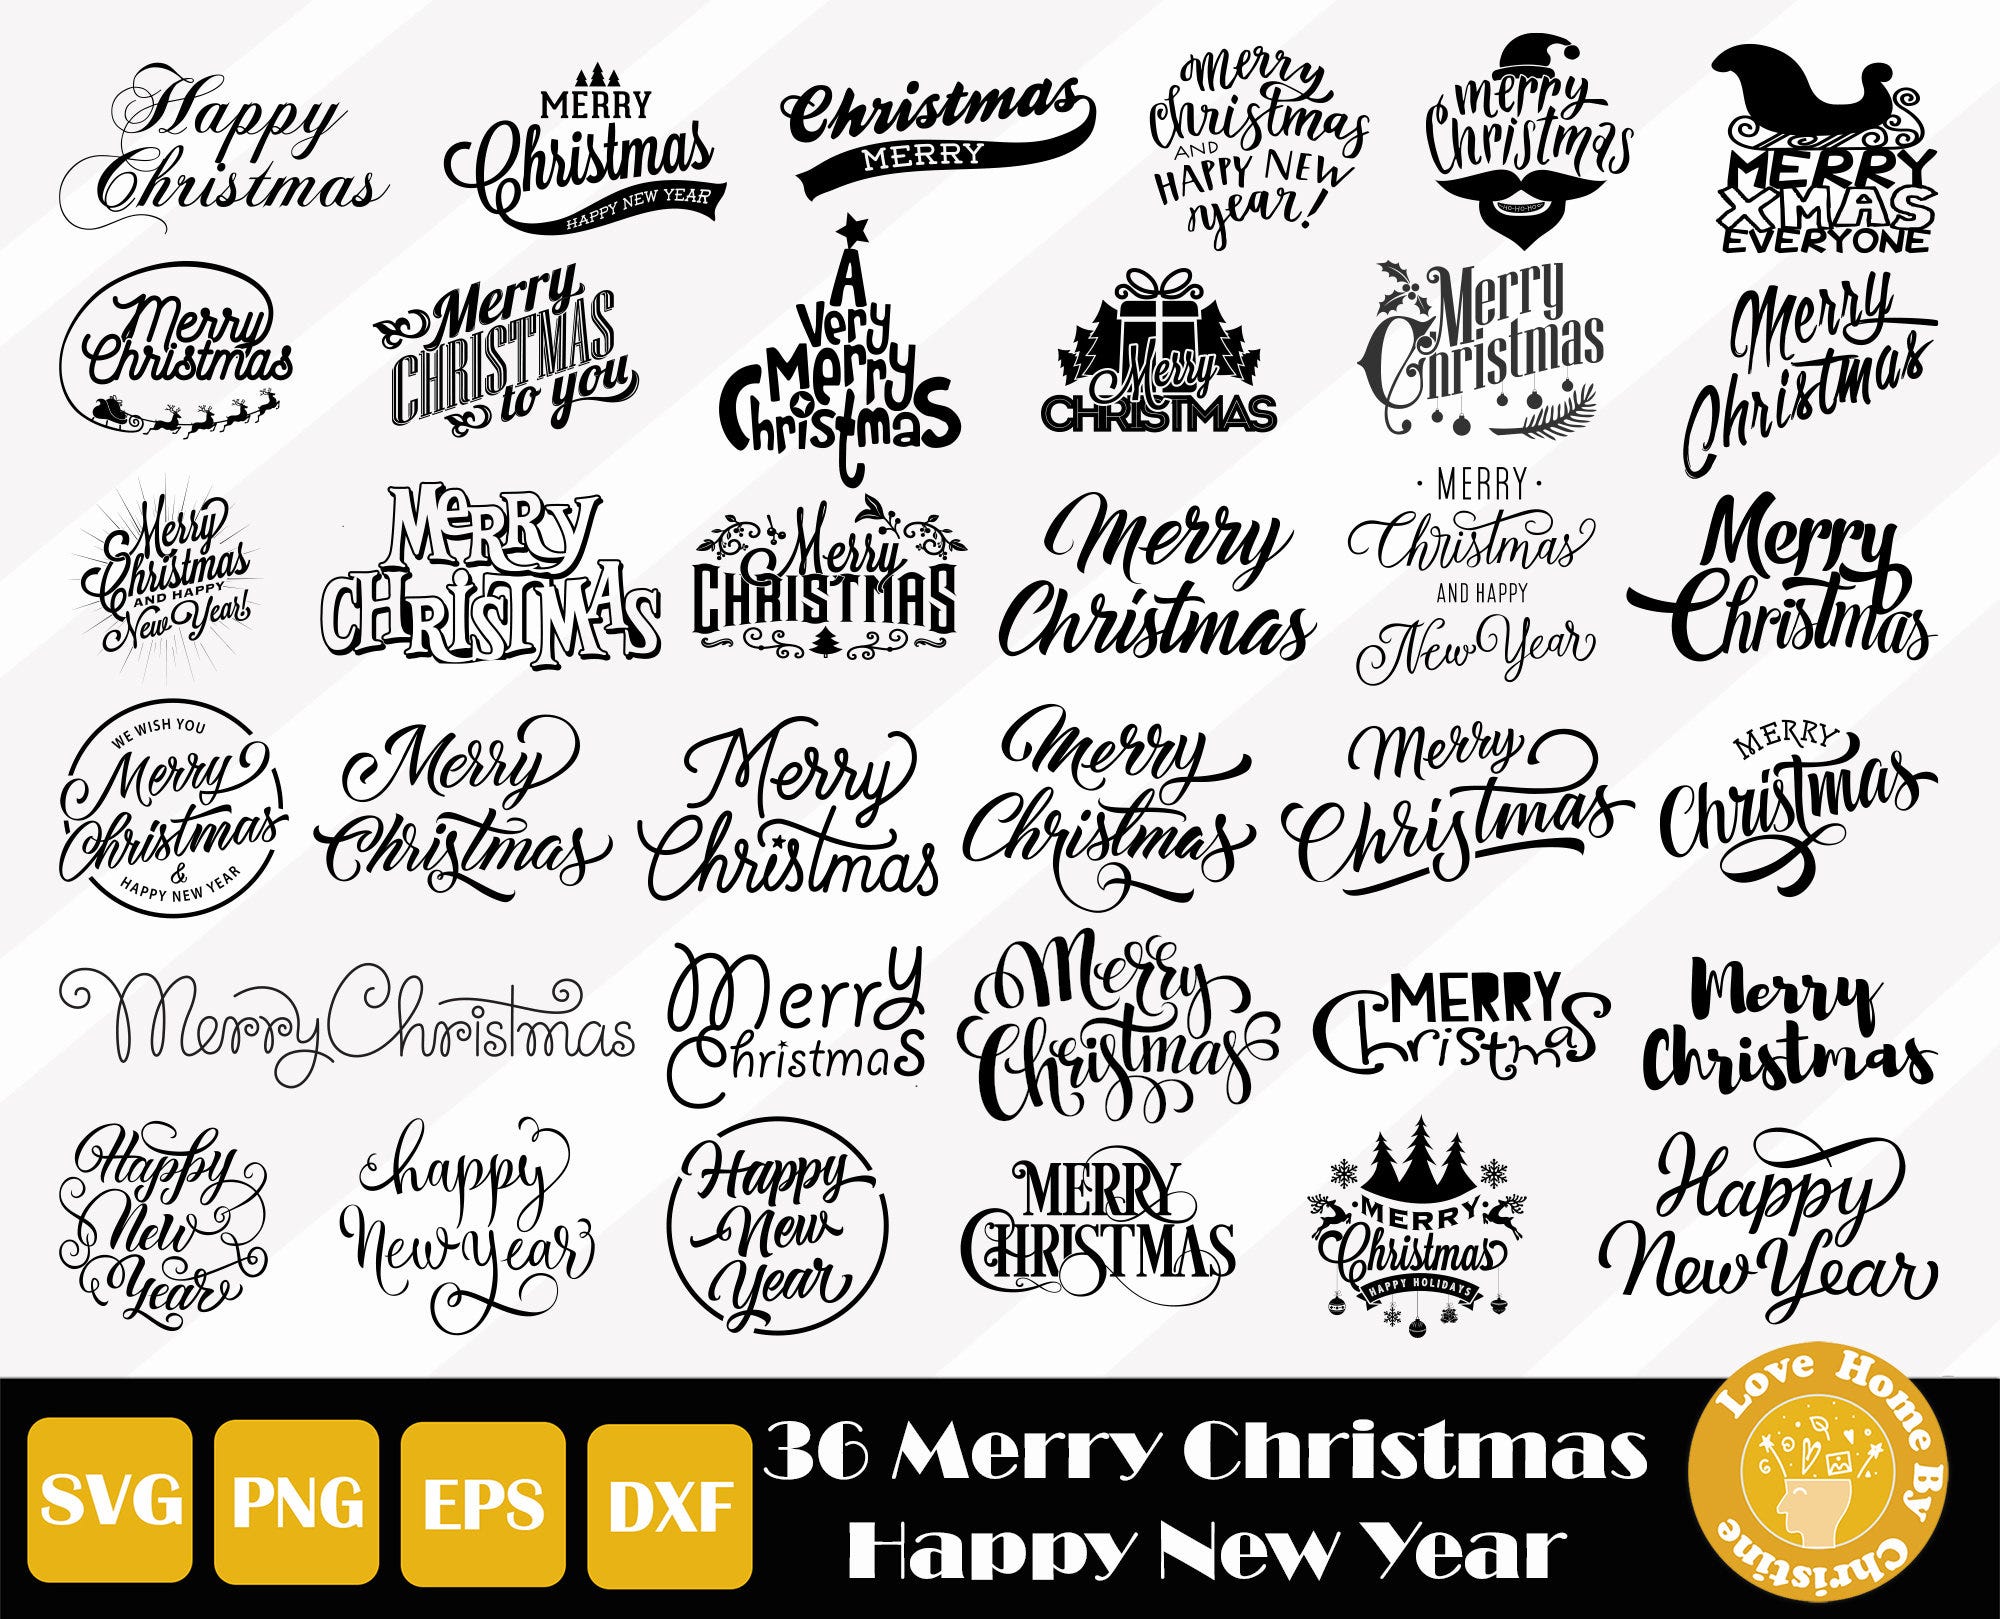 36 Merry Christmas Svg, Christmas Shirt Svg, Christmas Clipart, Christmas Cut File, Merry Christmas Clipart, Instant Download